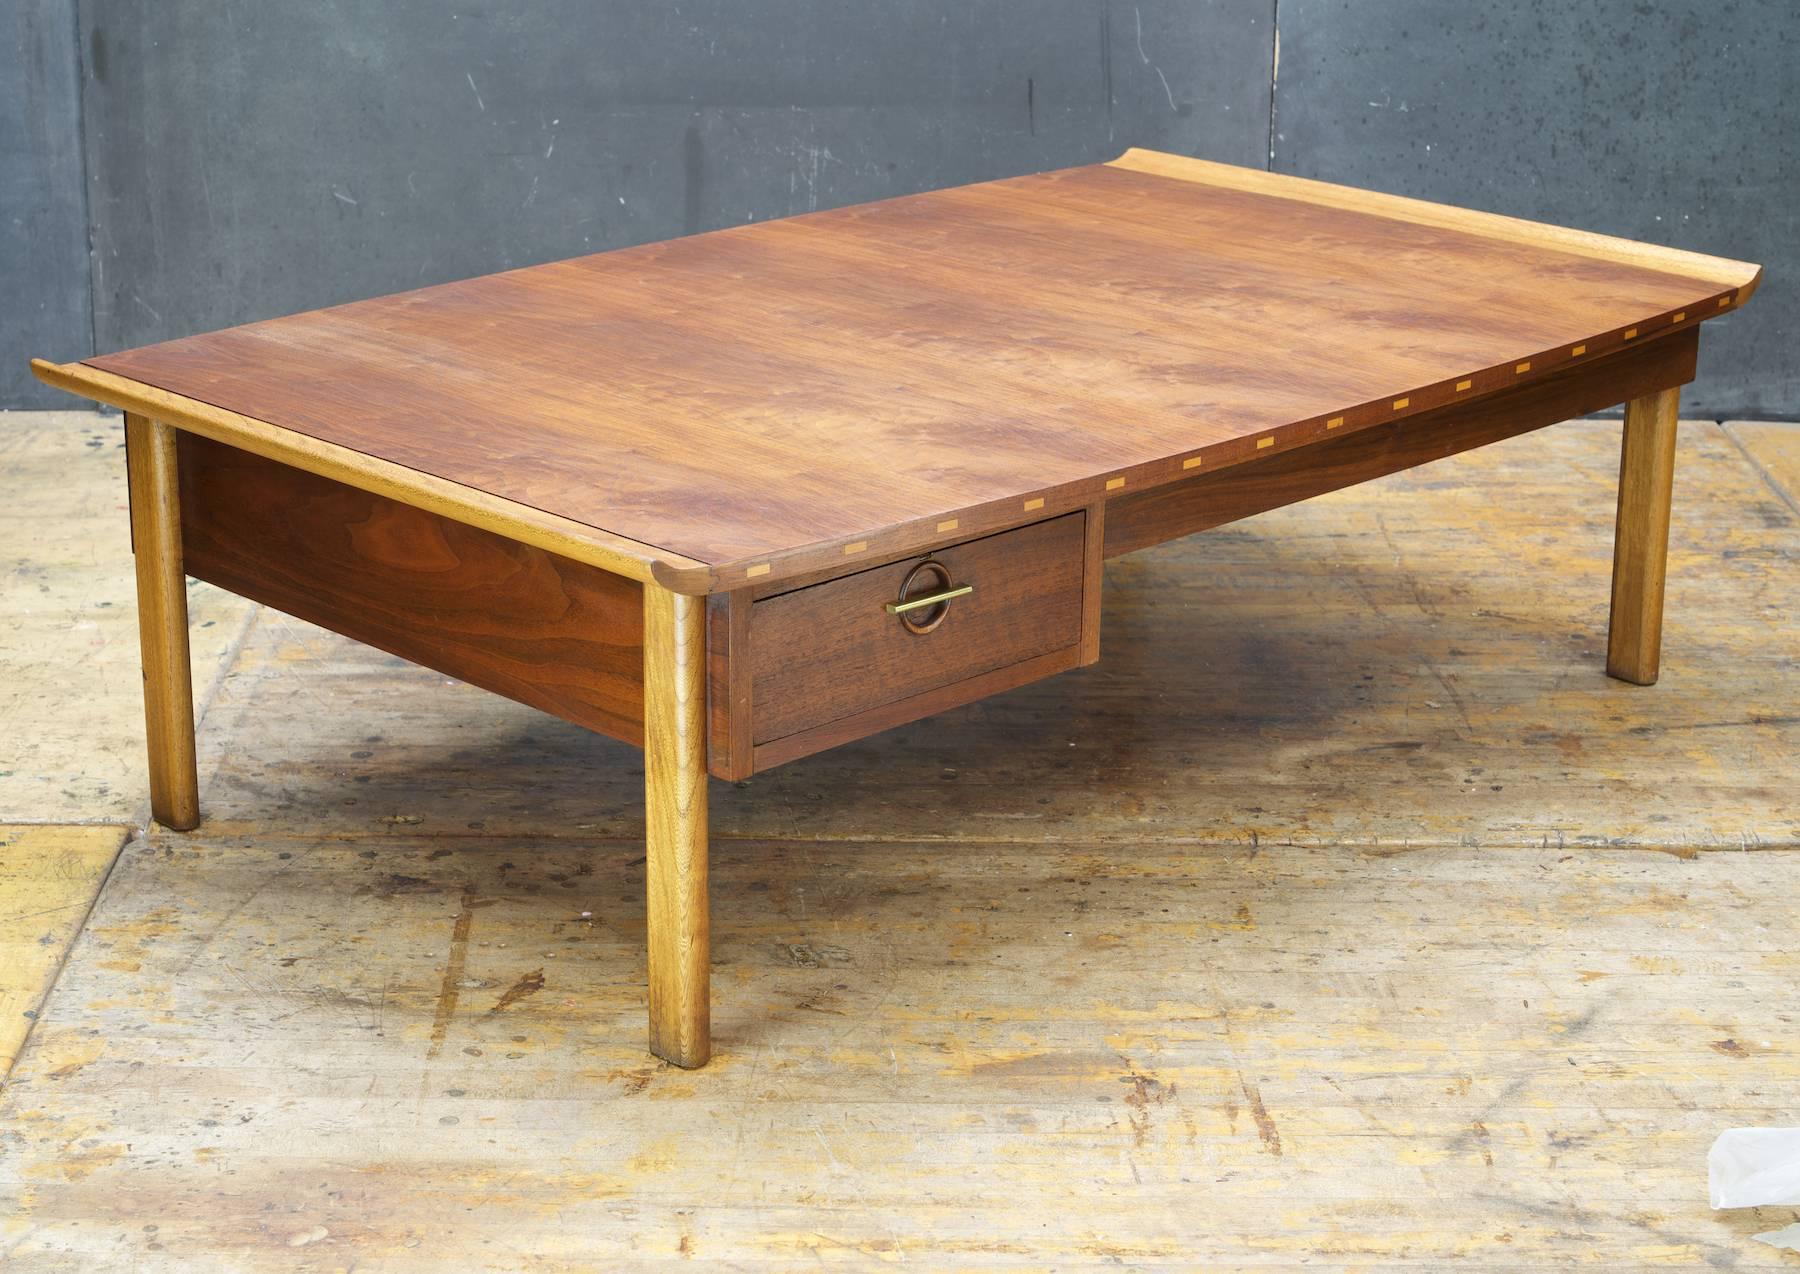 American Asian Styled Mid-Century Modern Flairing and Bowed Coffee Table